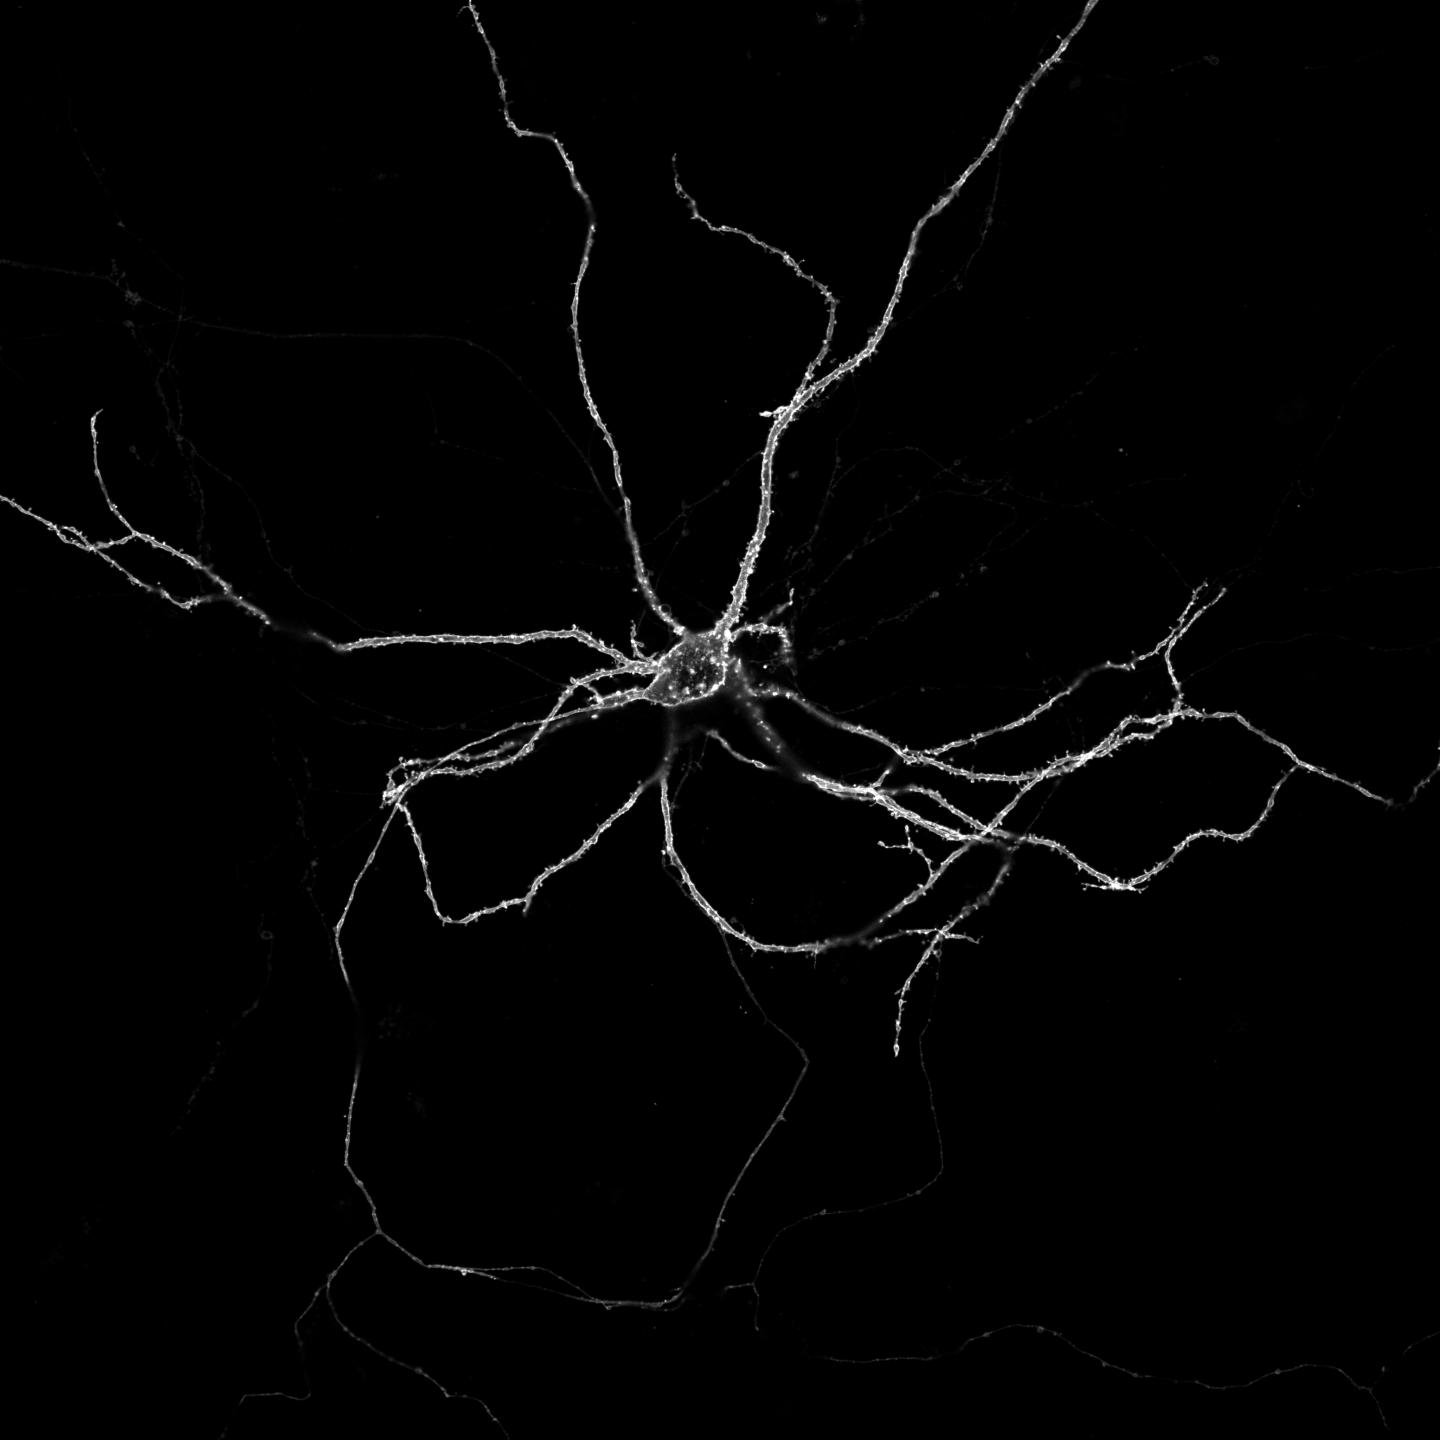 Image of a living nerve cell grown in the lab: